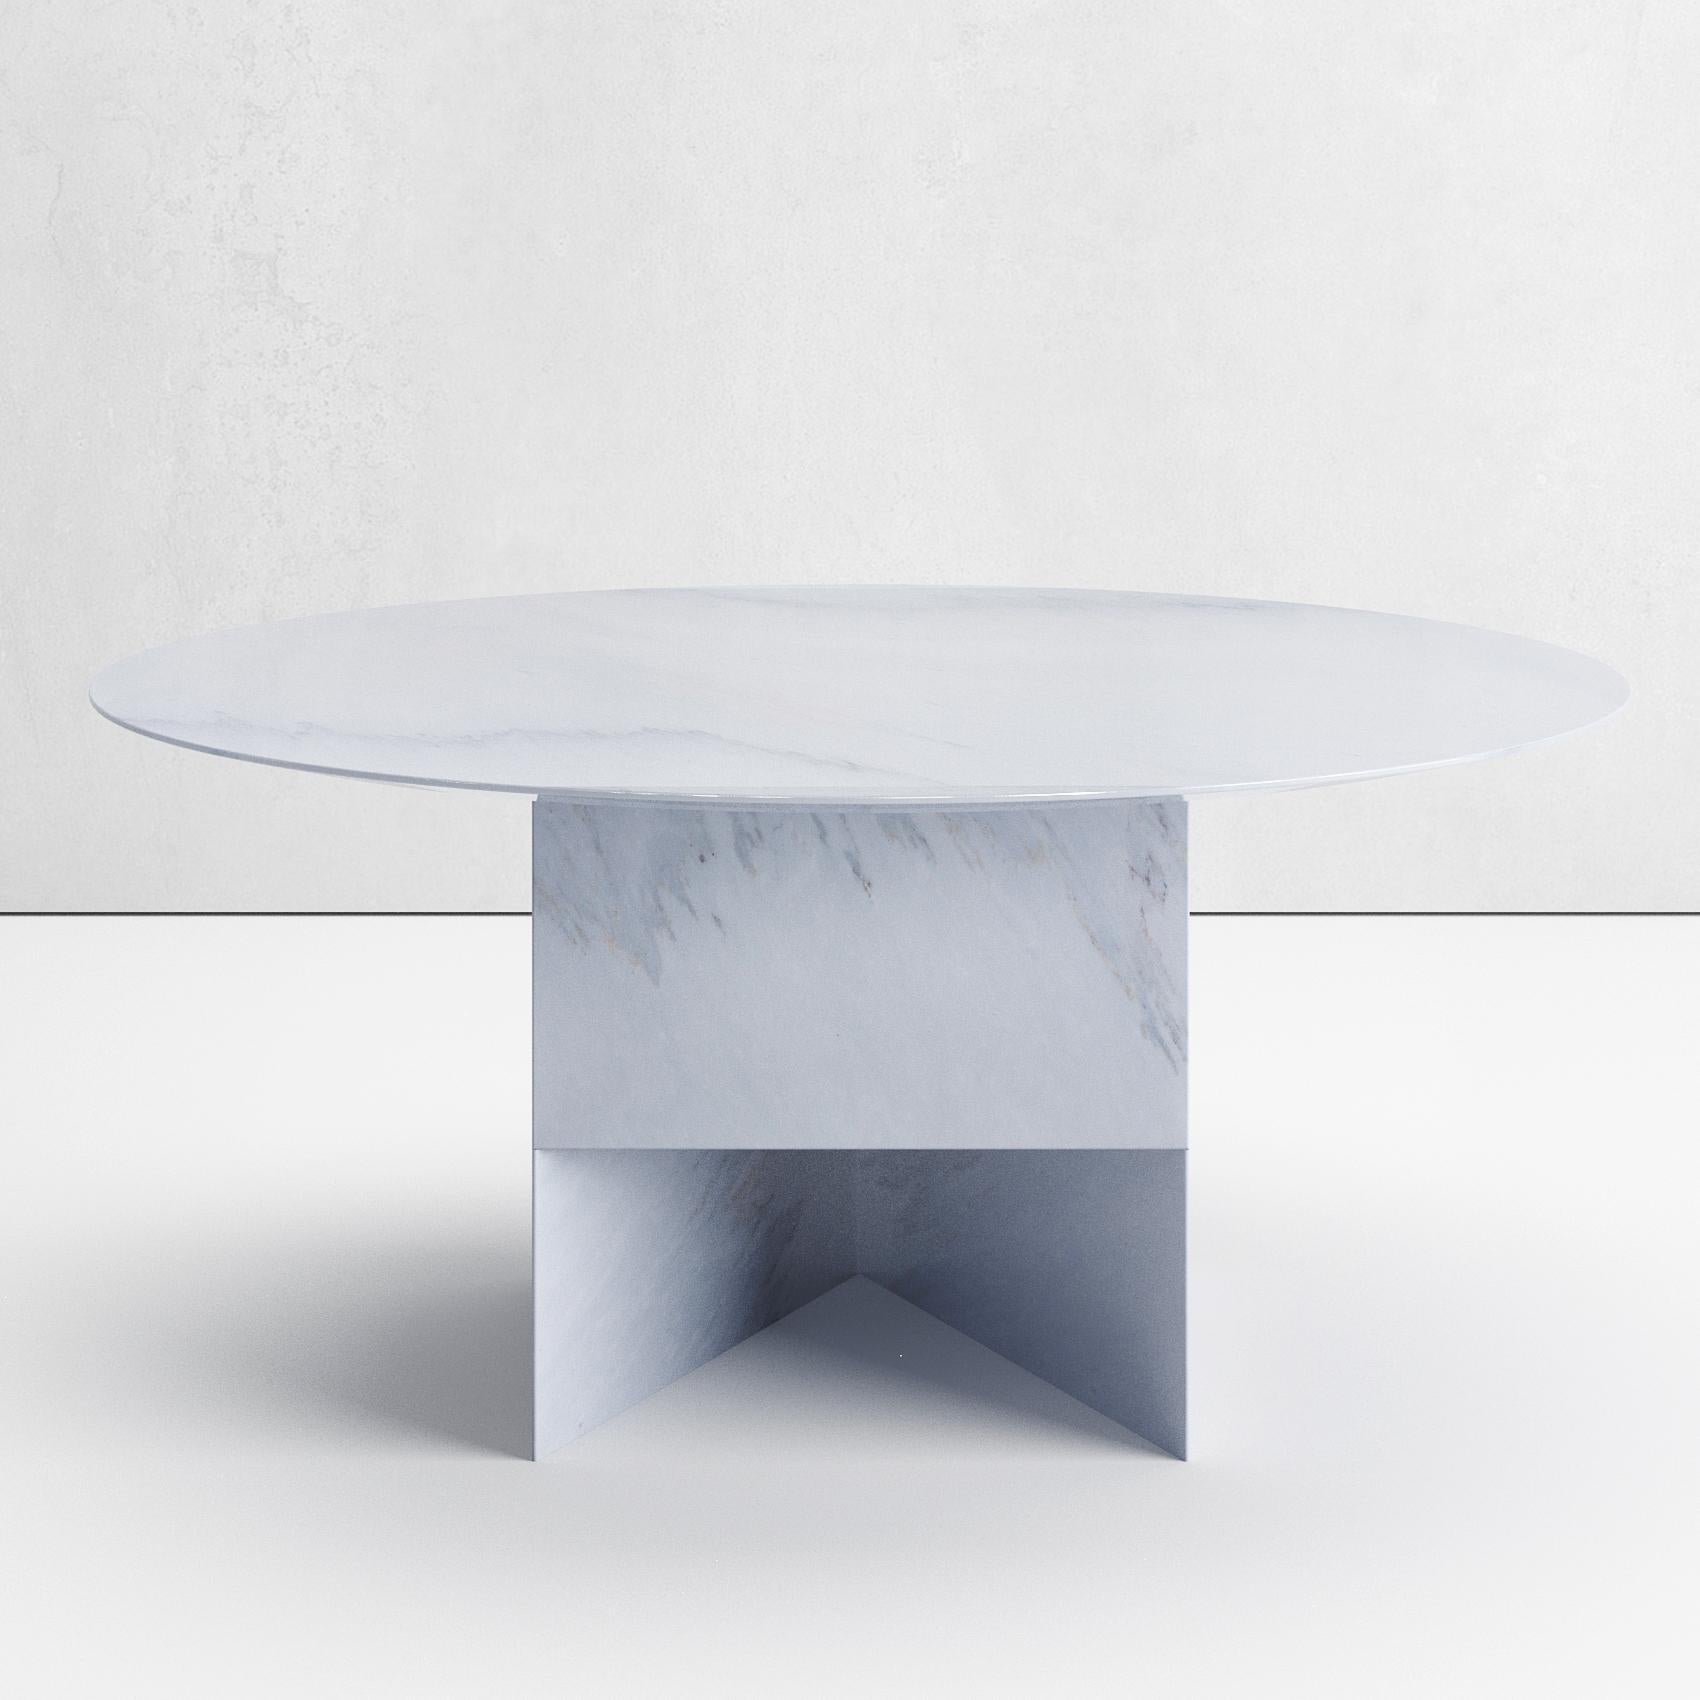 Mild difference marble table by Scattered Disc Objects 
Limited Edition 8+4 AP.
Dimensions: Diameter 160 x height 73 cm 
Material: carrara marble or bardiglio marble.
Technique: Base carved from a solid marble block and properly lighted for